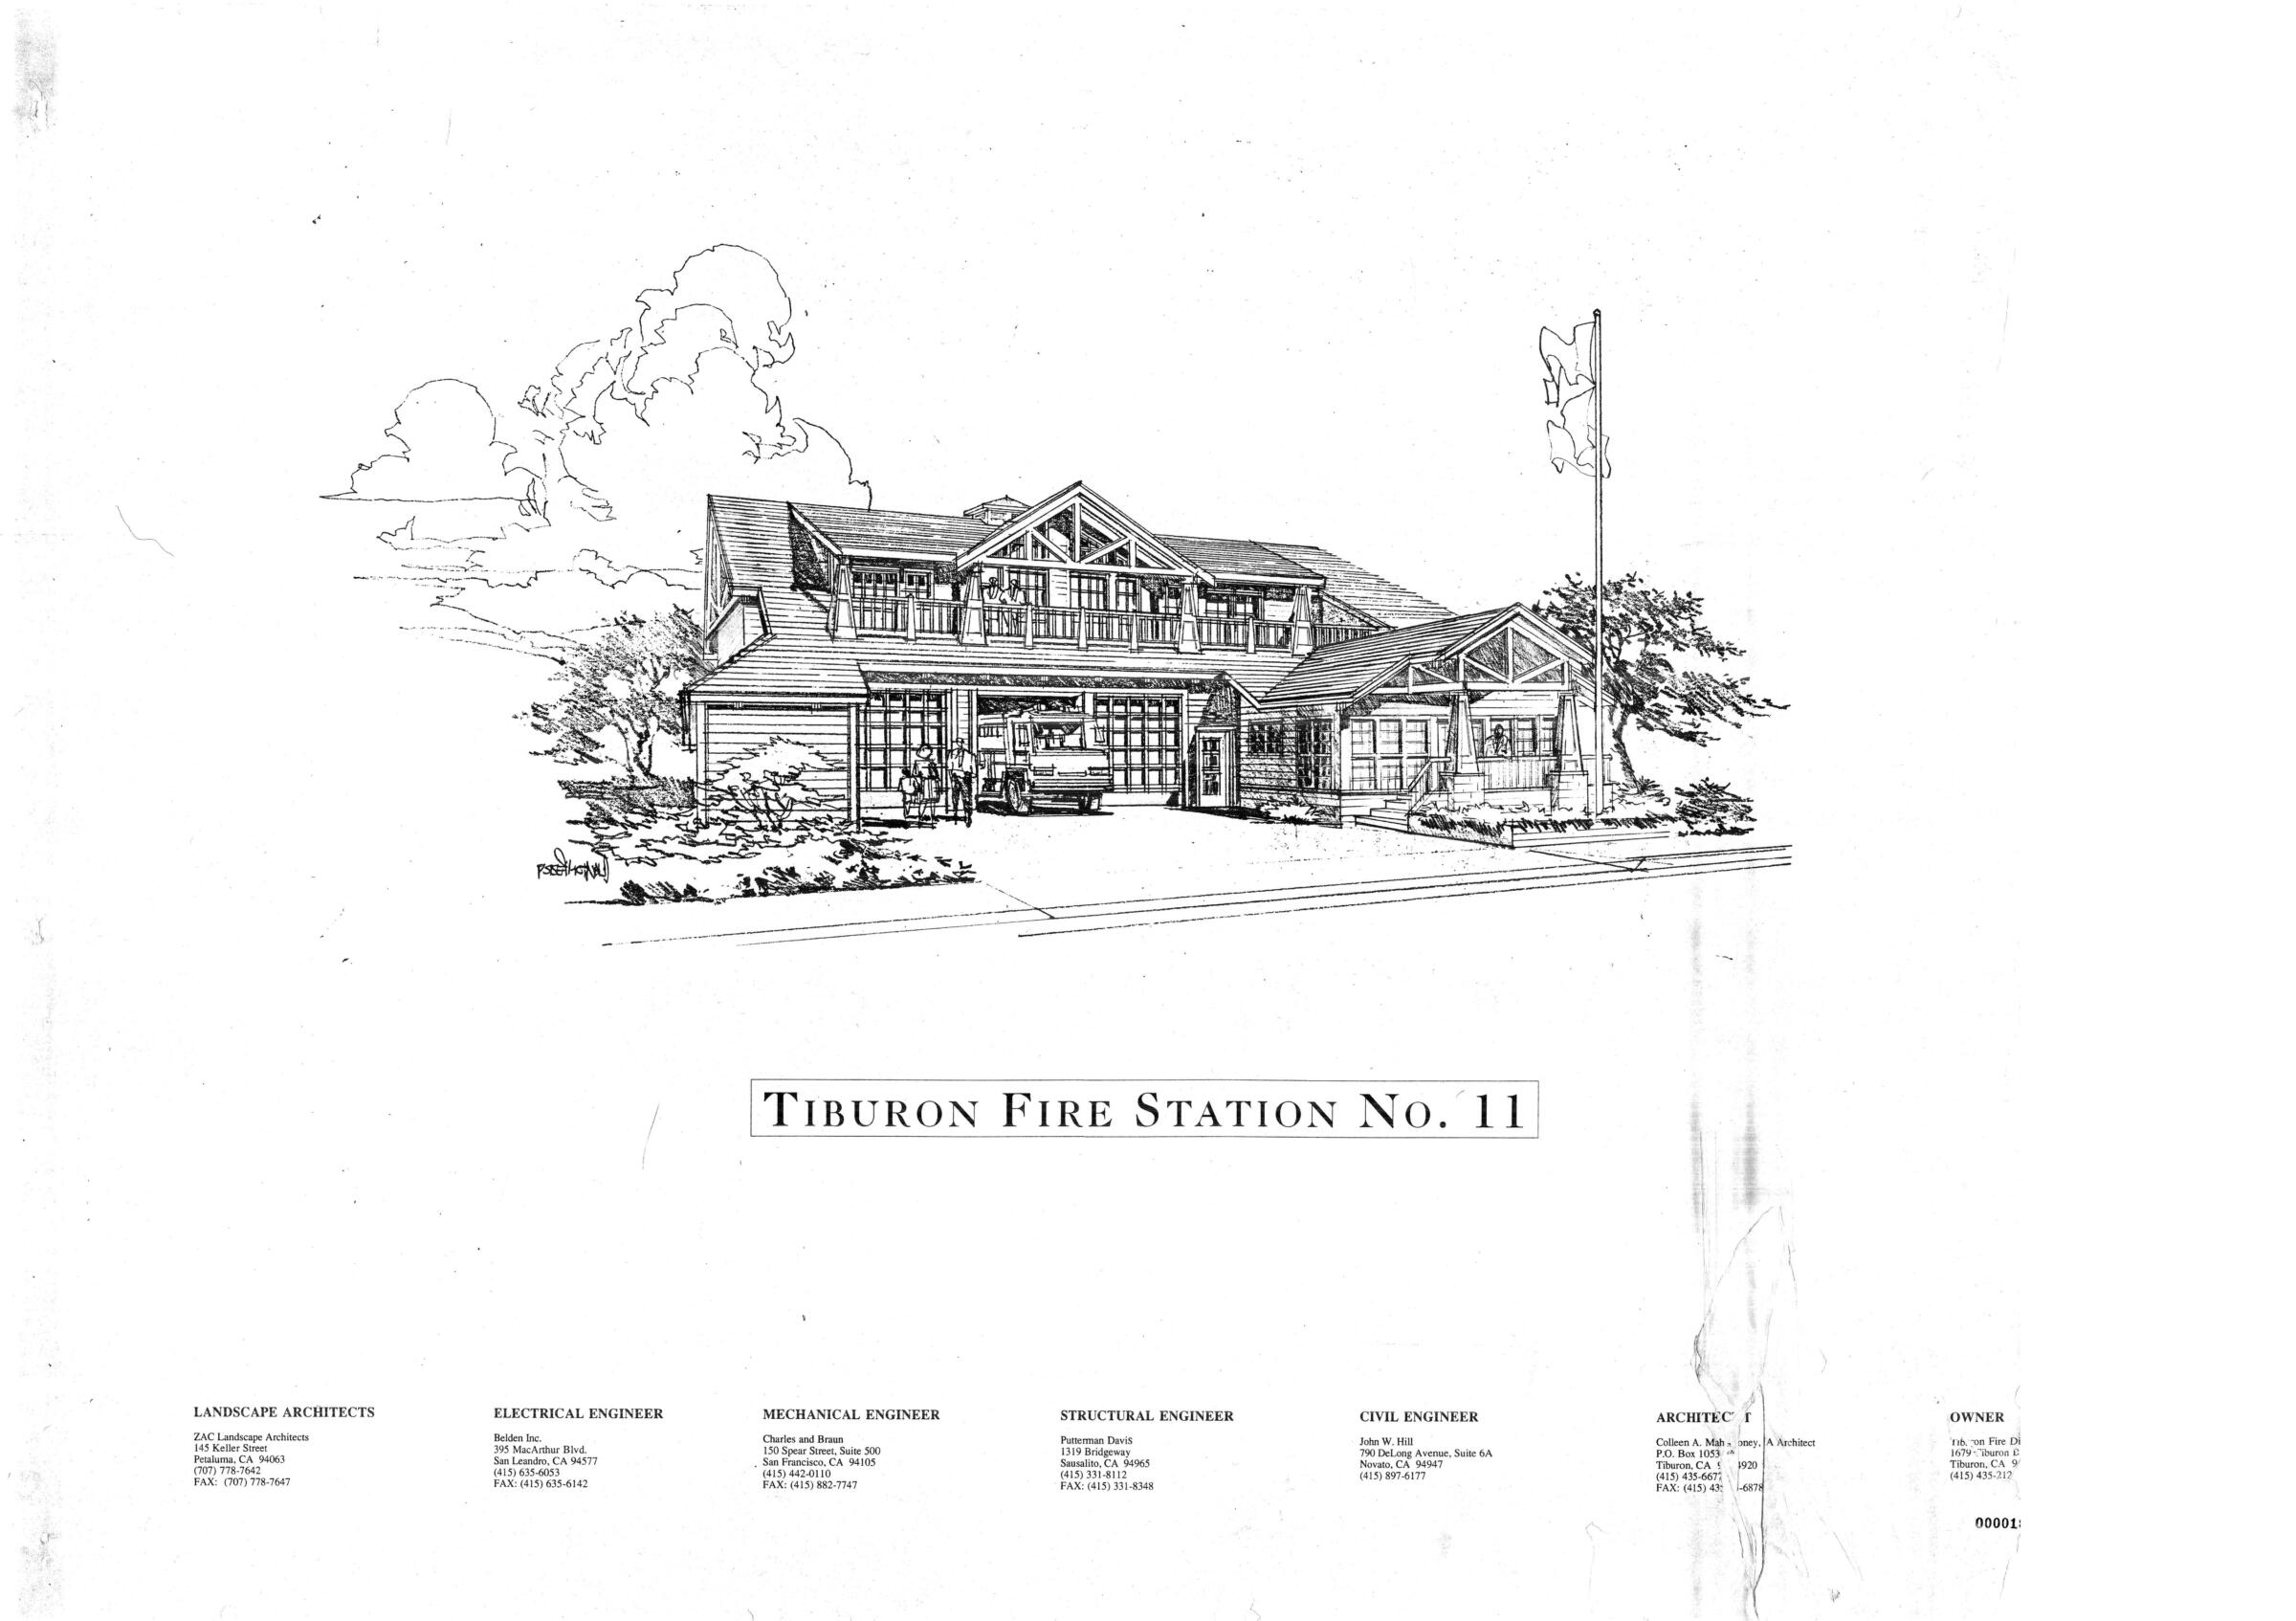 Tiburon Fire Cover page 1